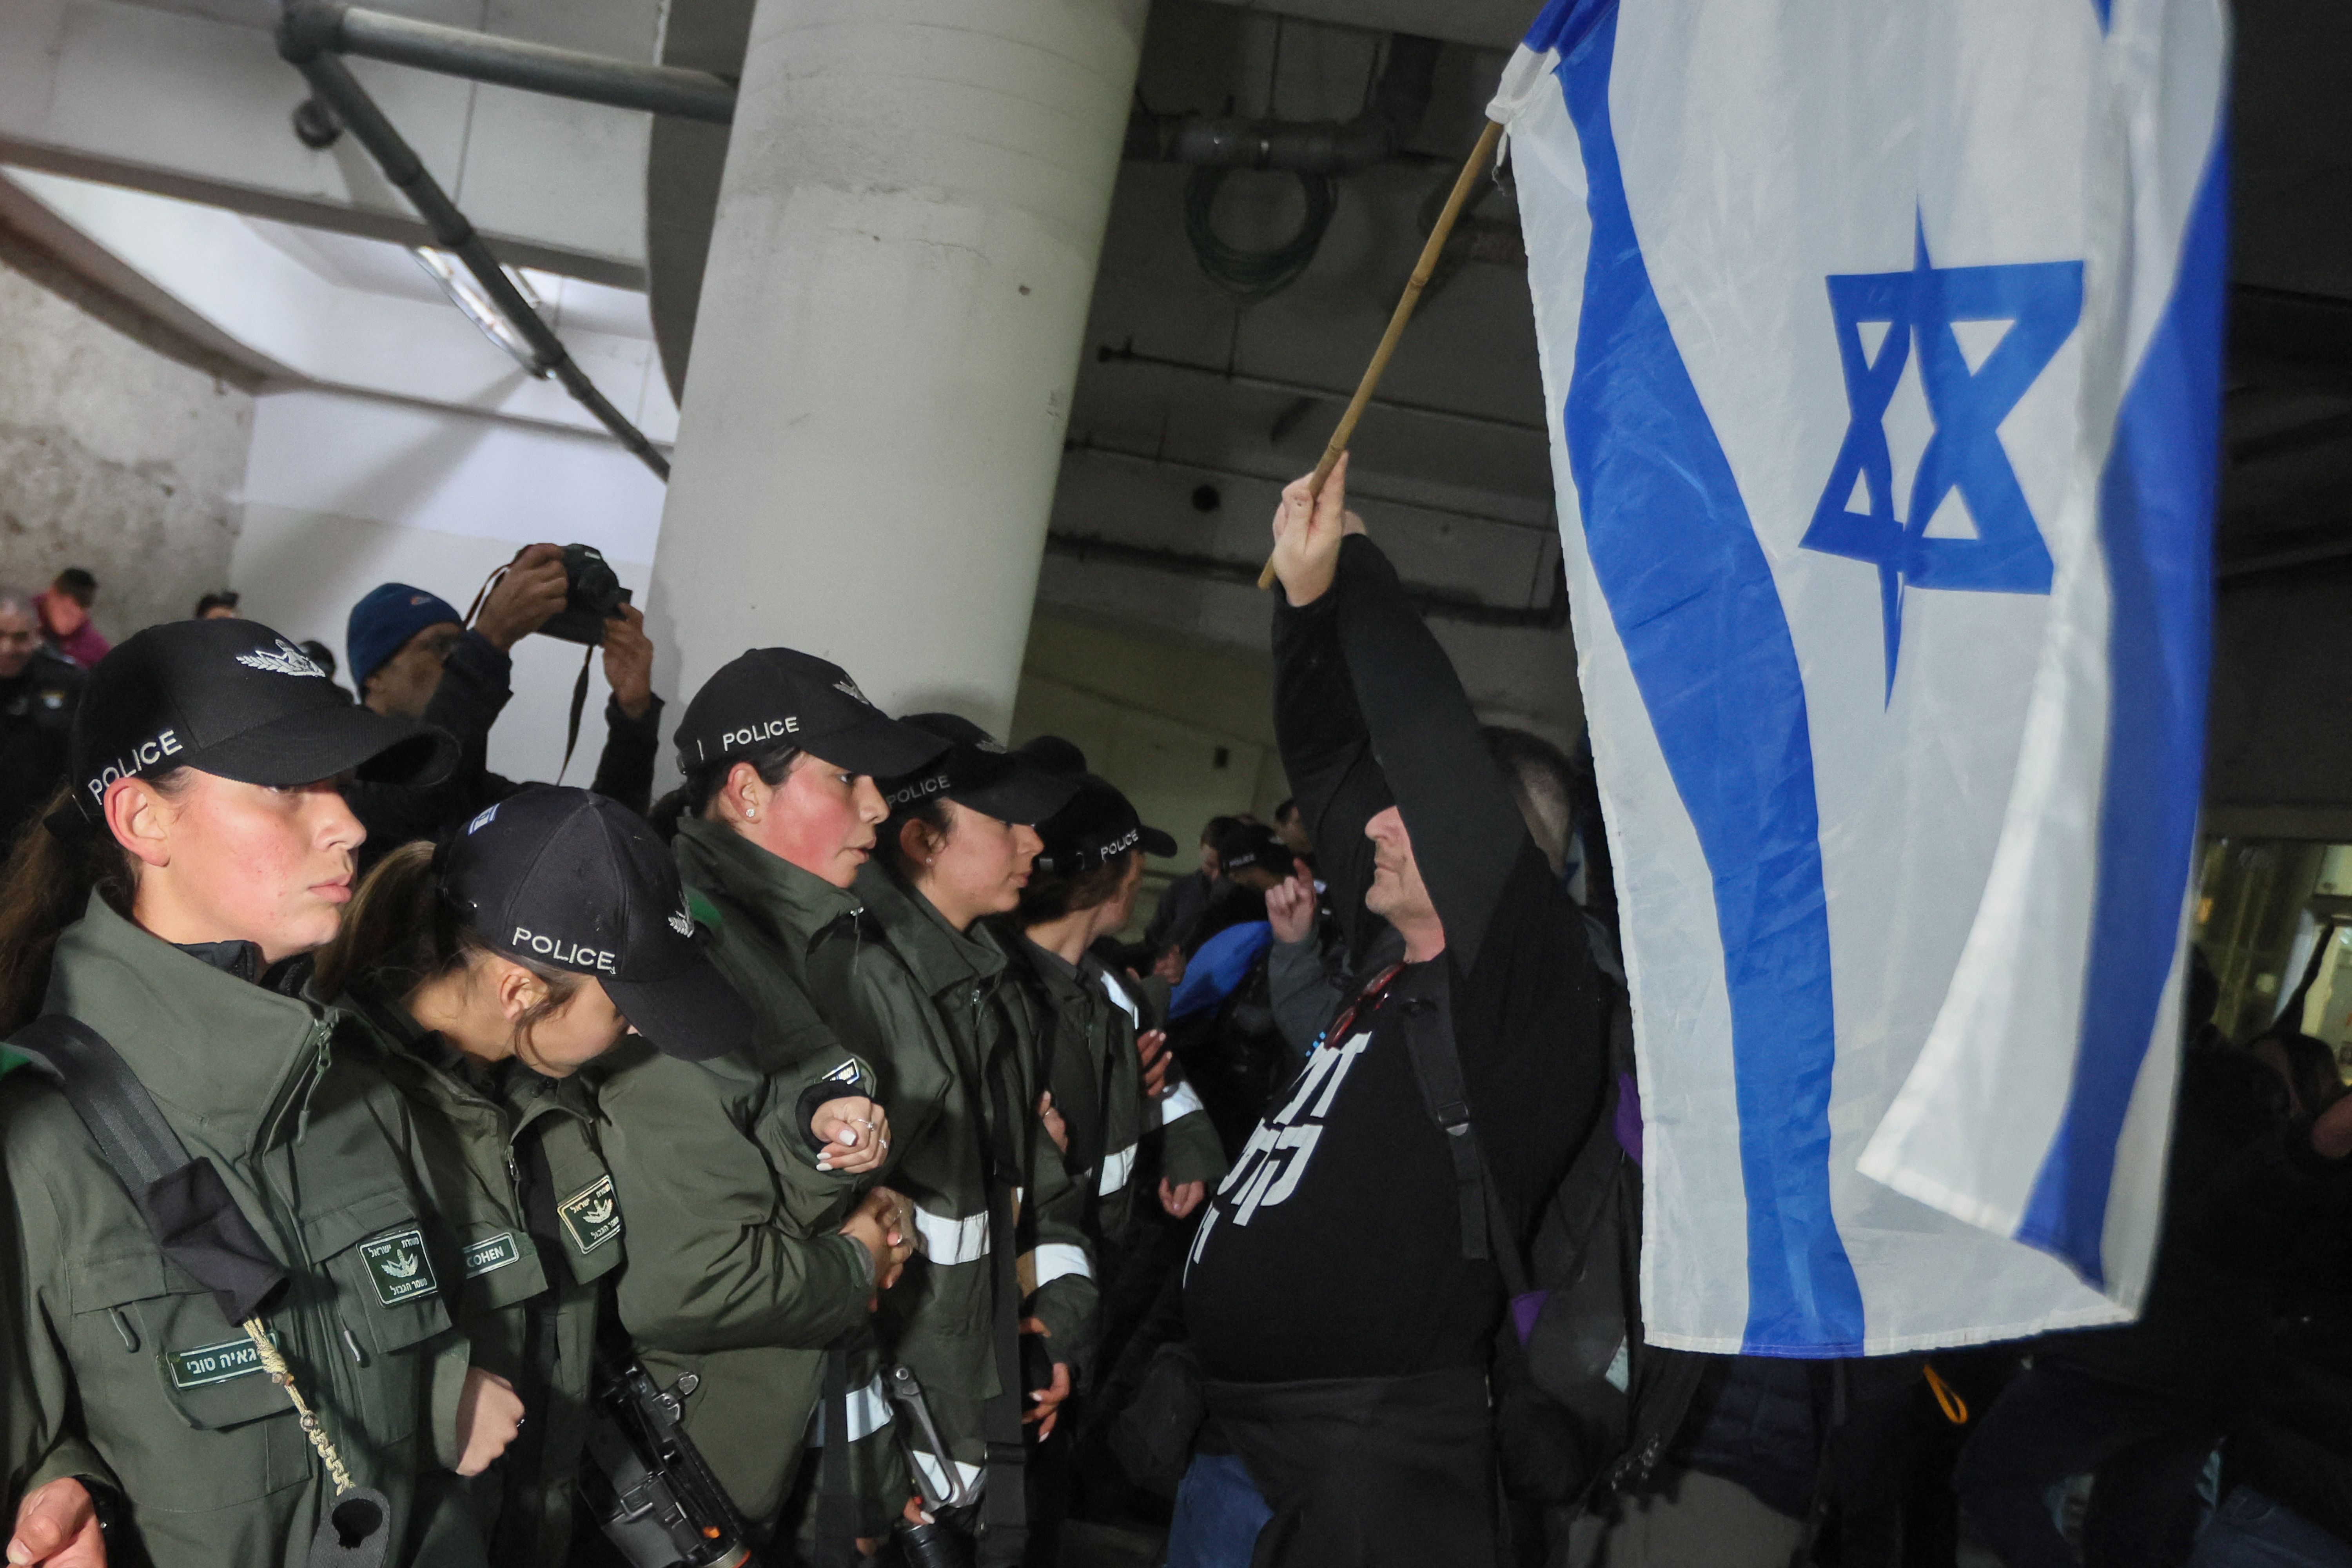 Security officers in green uniforms with rifles form a line pushing a group of protesters waving an Israeli flag back in a large indoor space. 